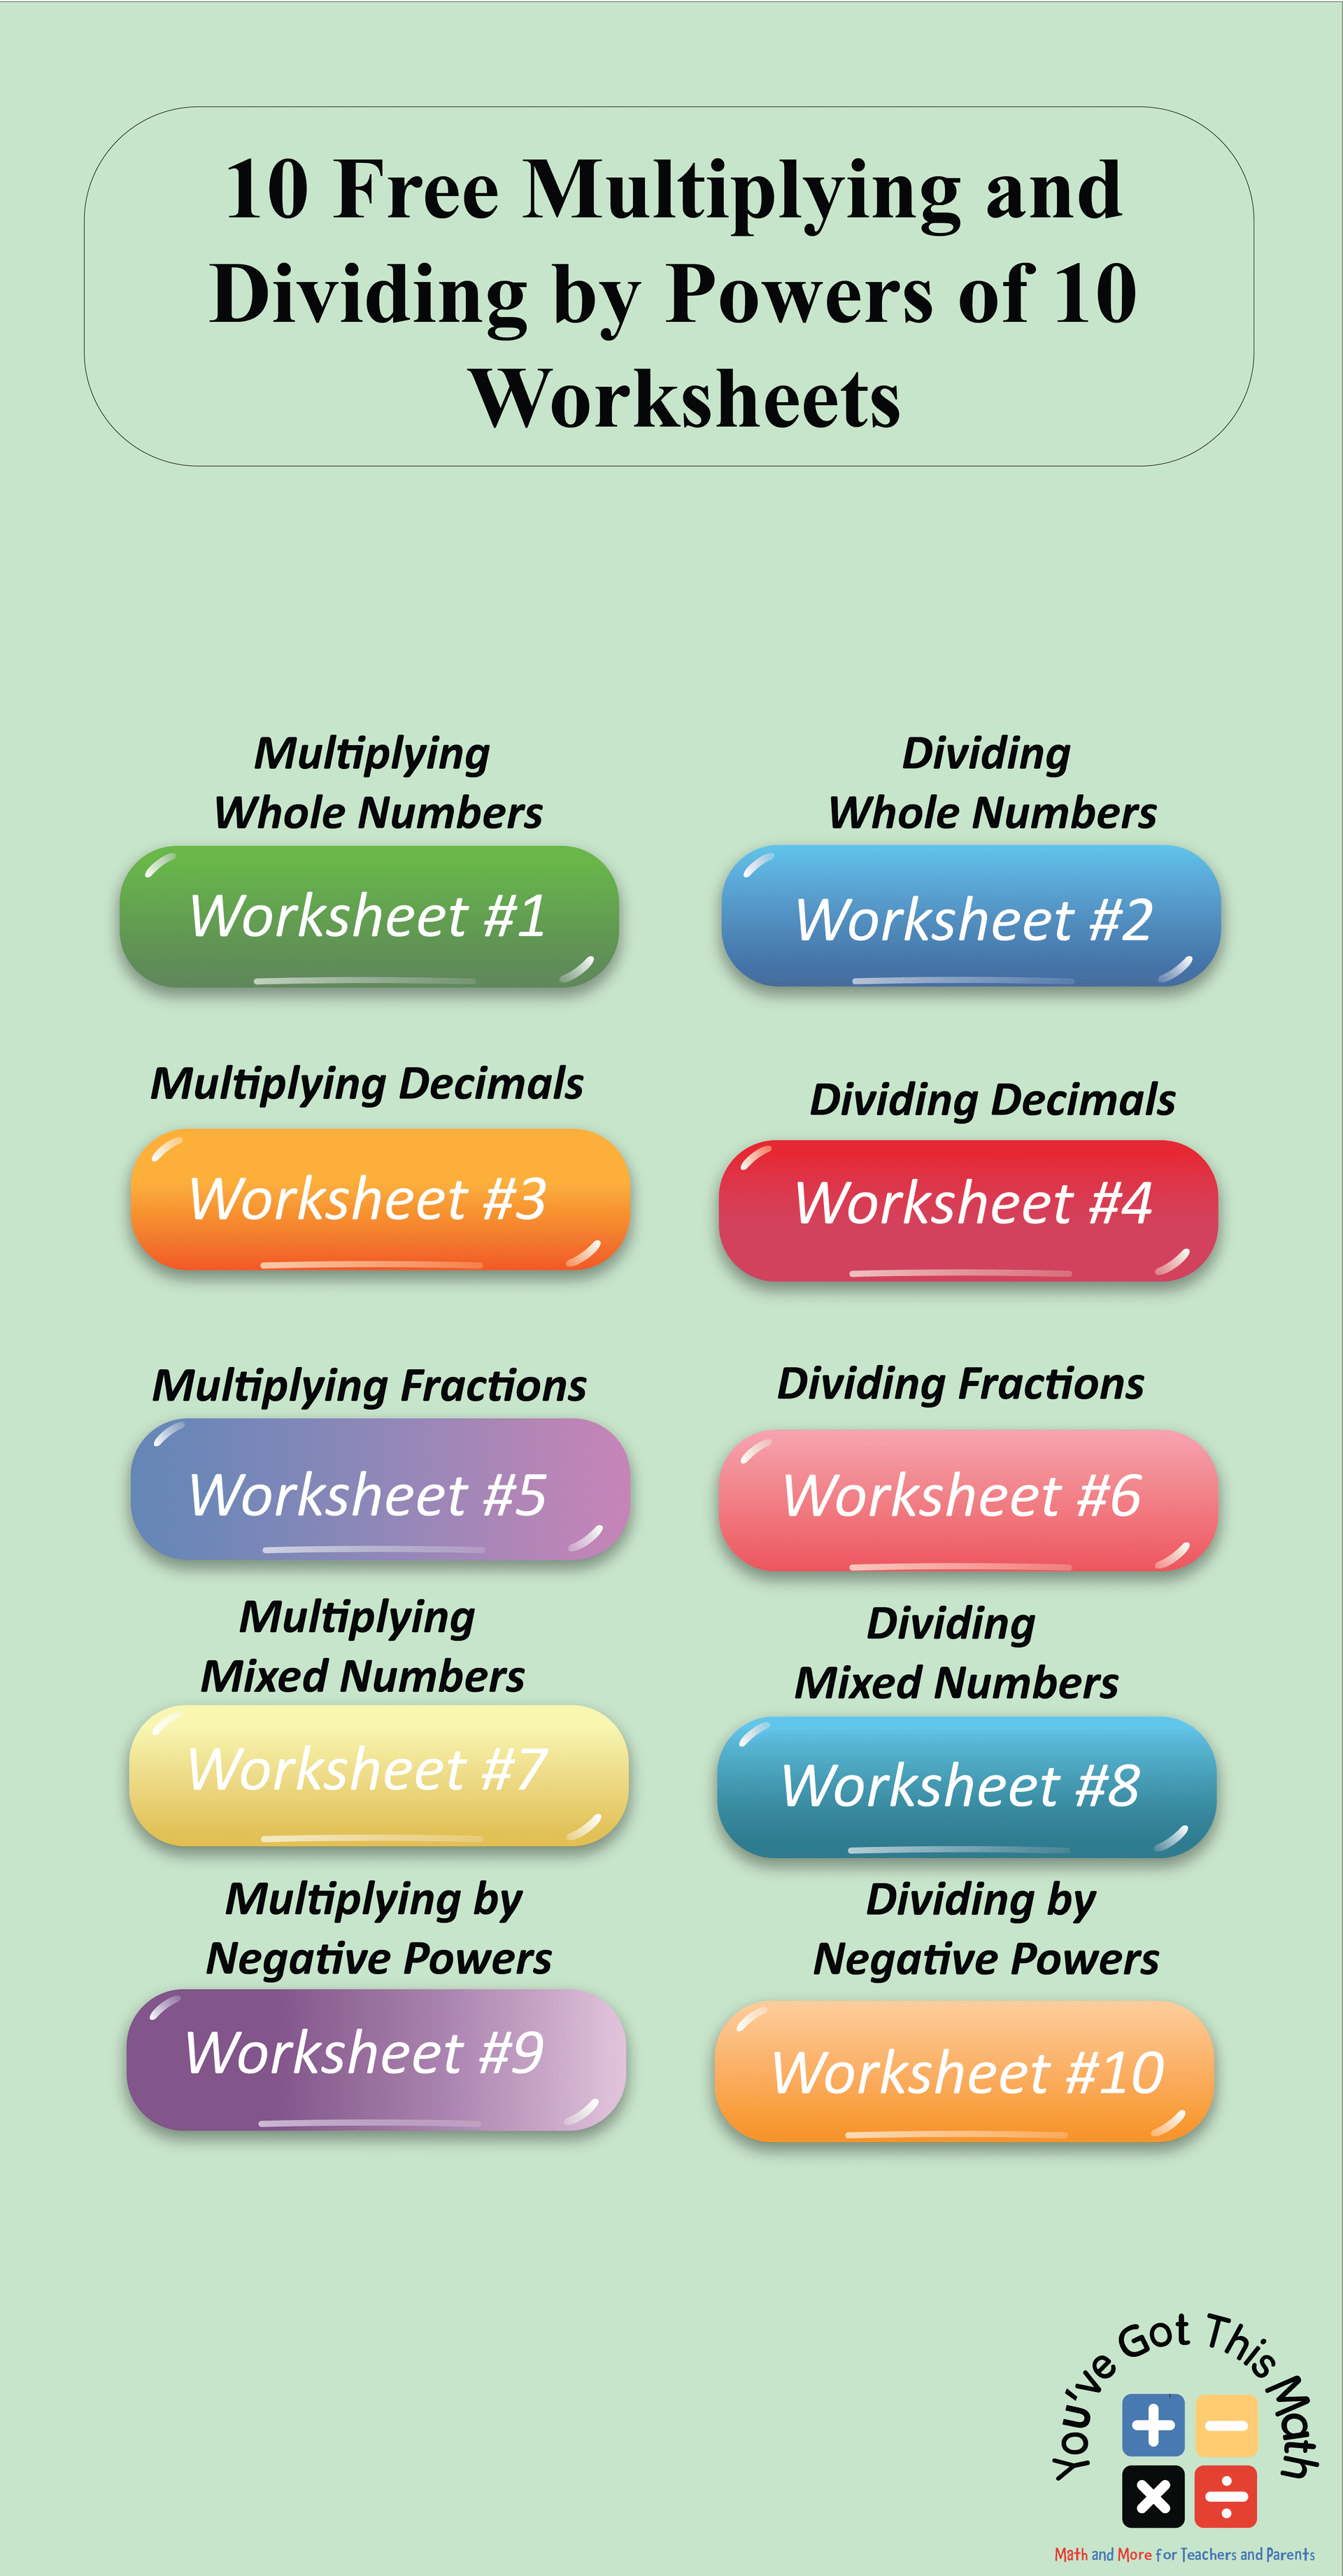 10 Free Multiplying and Dividing by Powers of 10 Worksheet-01